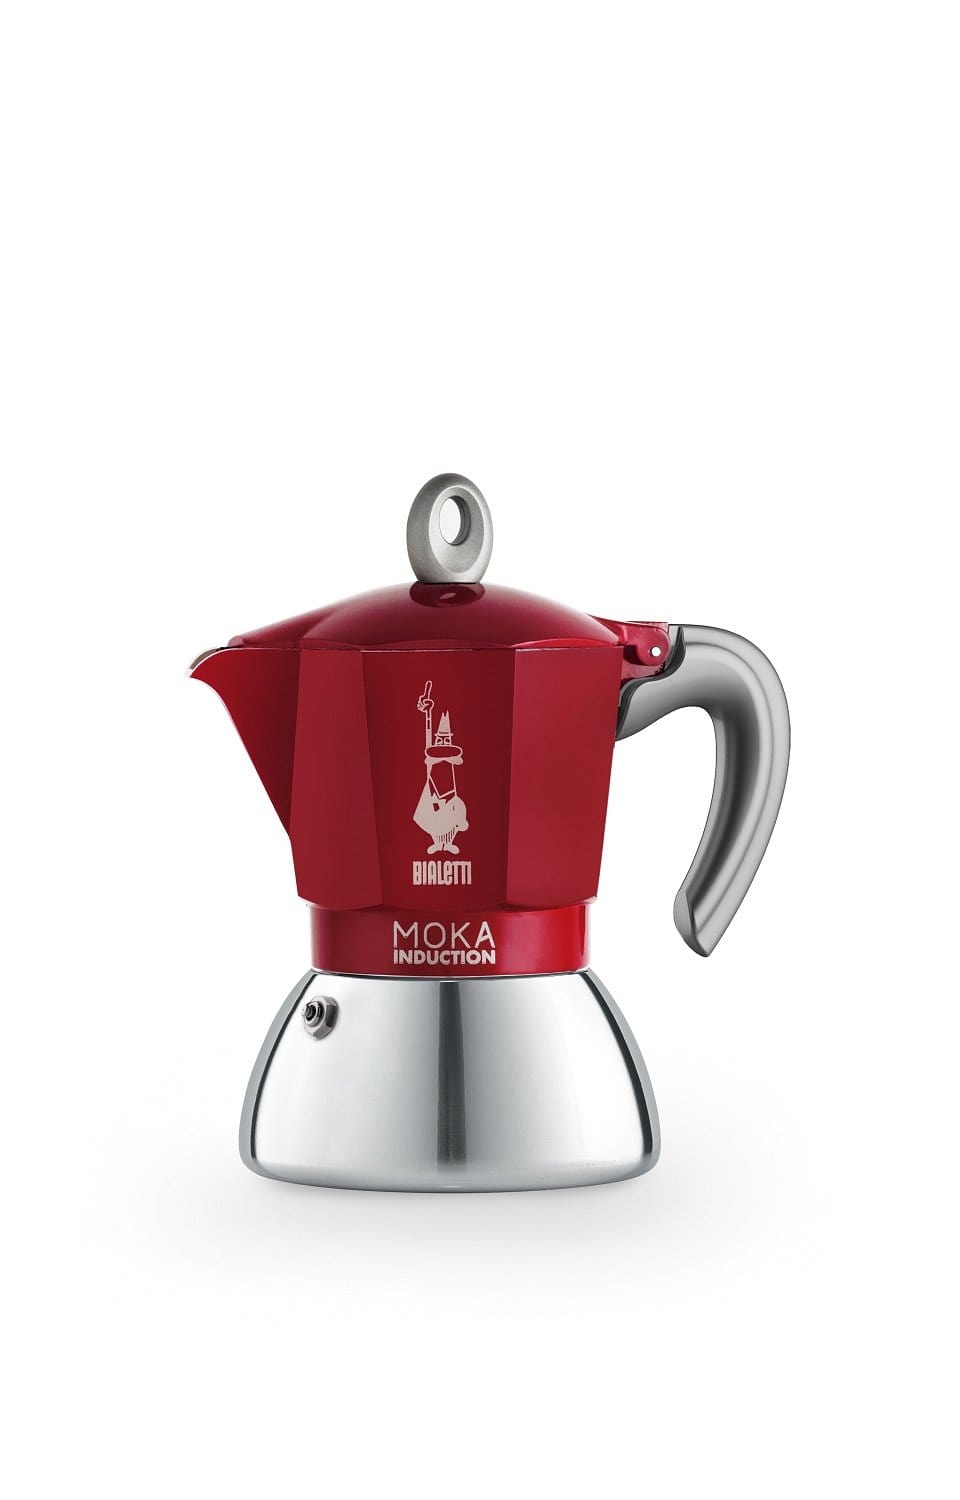 BIALETTI NEW MOKA INDUCTION COFFEE MAKER RED 4 CUPS - 6944